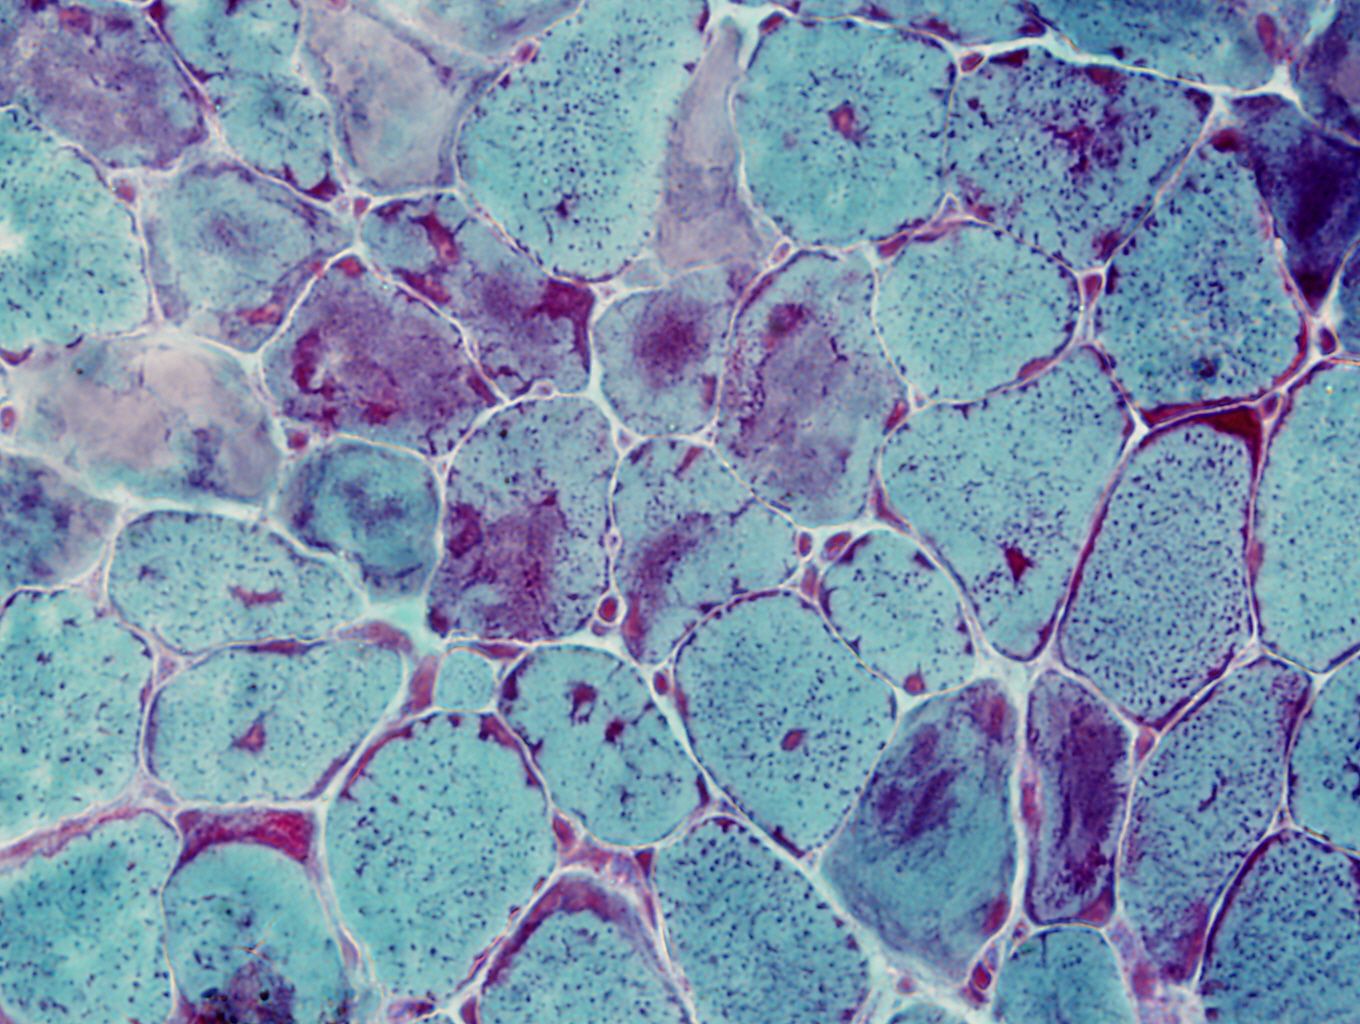 Gomori trichrome staining of skeletal muscle from a mouse with a congenital myopathy. The dark blue and purple regions show abnormal accumulations of proteins.